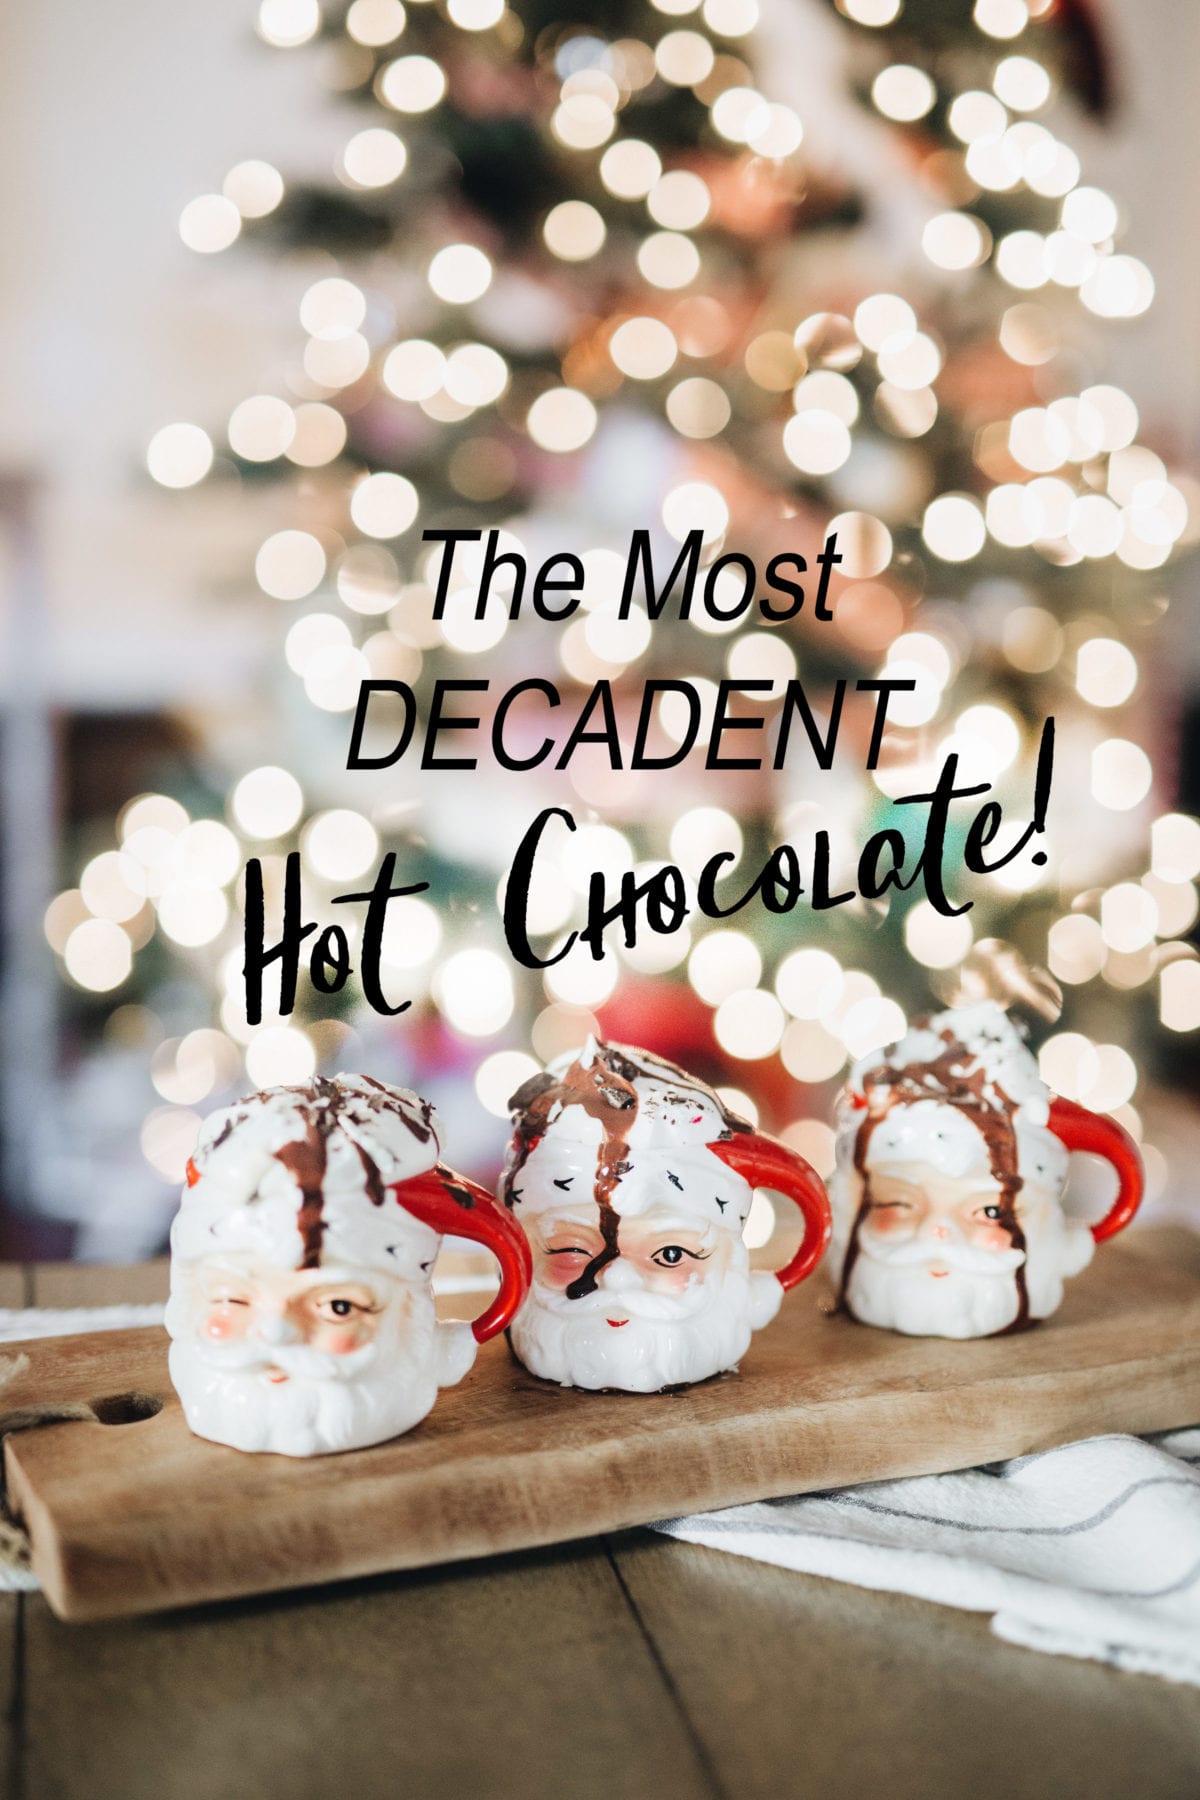 The Most Decadent Hot Chocolate